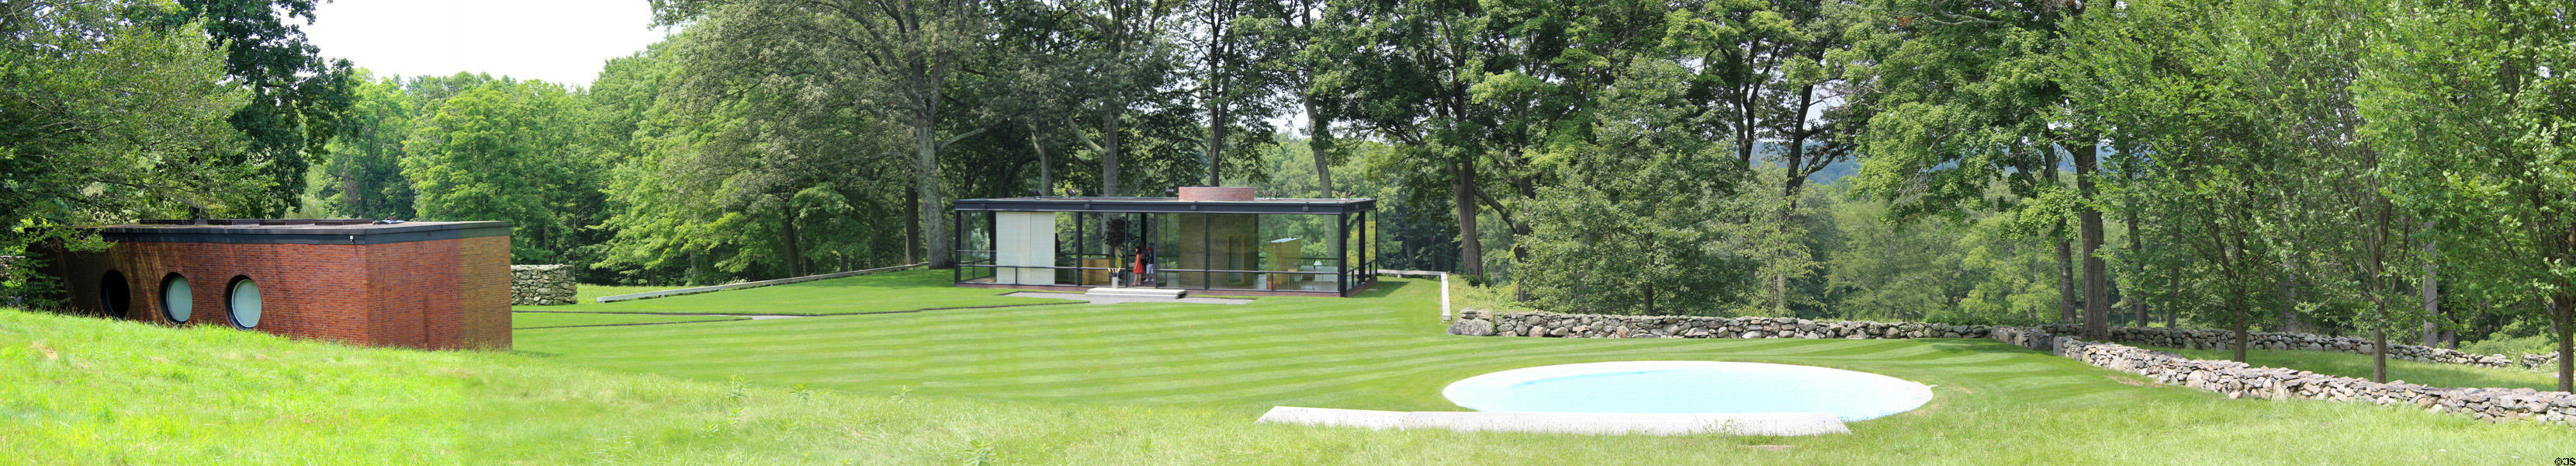 Panorama of Brick House, Glass House & pool at Philip Johnson Glass House. New Canaan, CT.